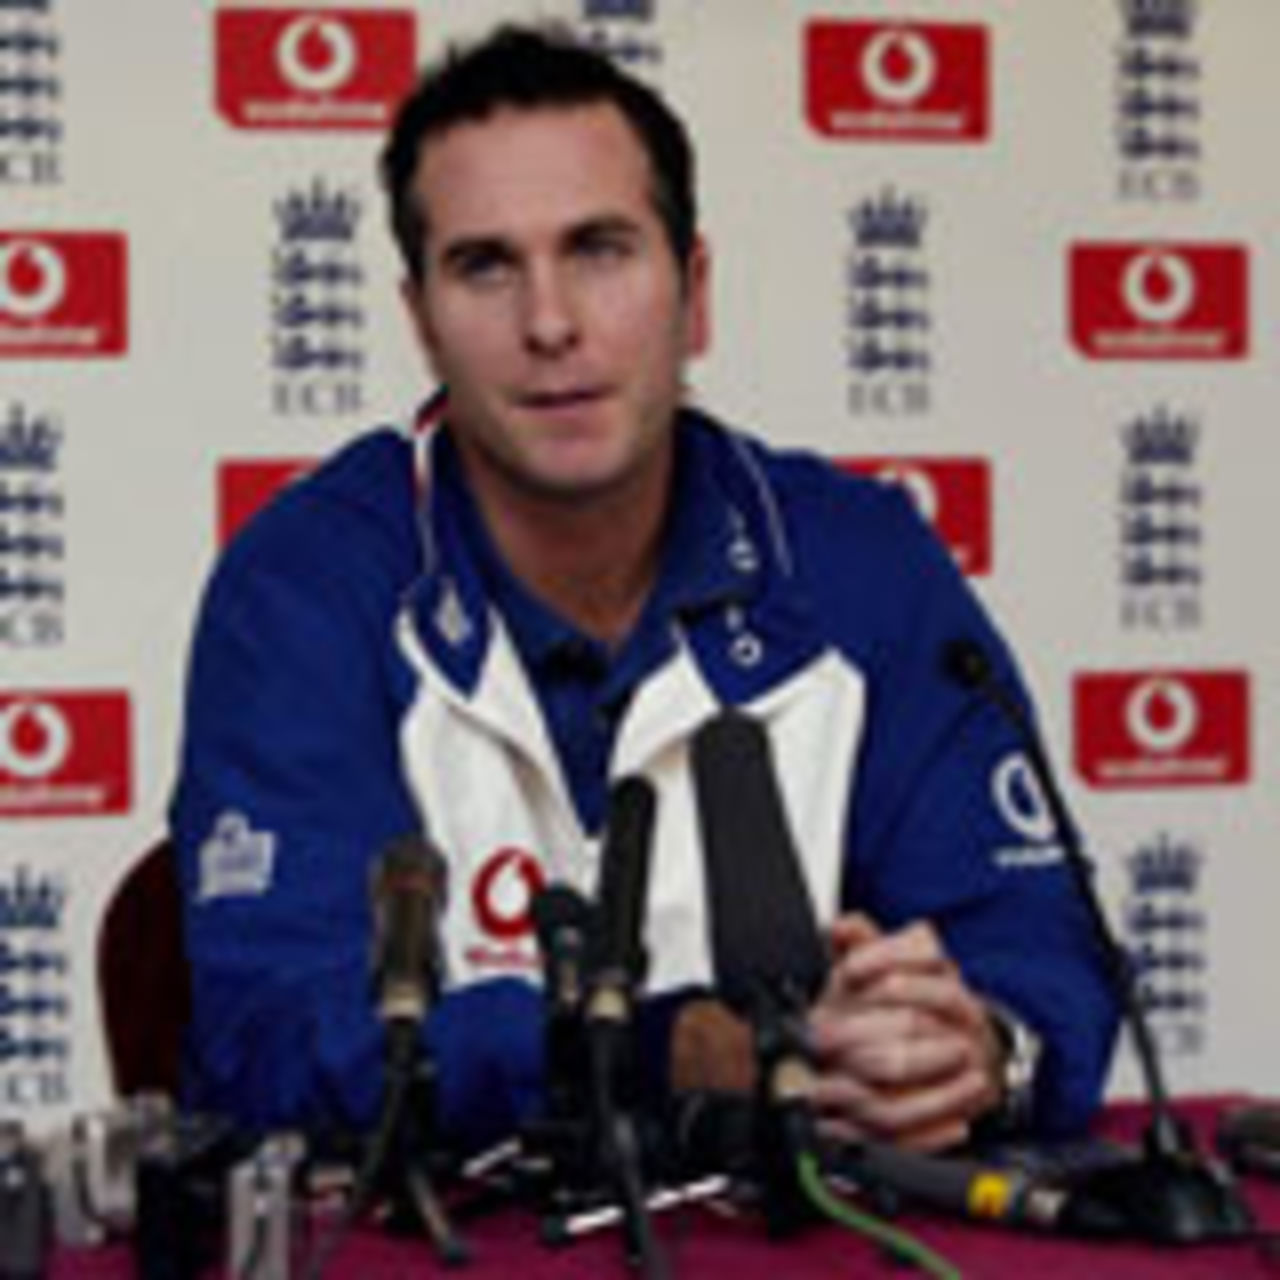 Michael Vaughan at a press conference, London, February 25, 2004